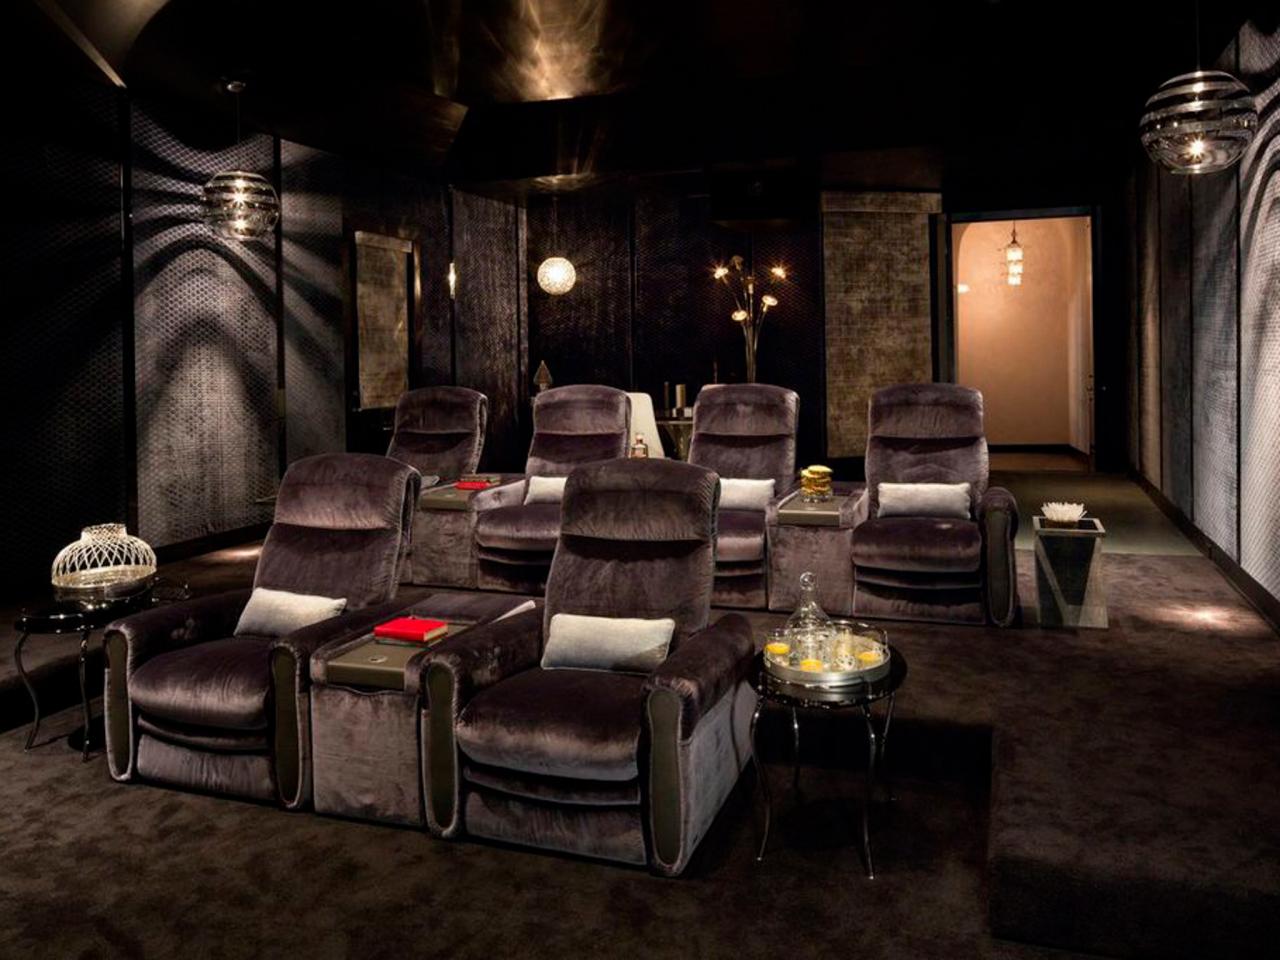 Home Theater Decor: Pictures, Options, Tips amp; Ideas | Home Remodeling 